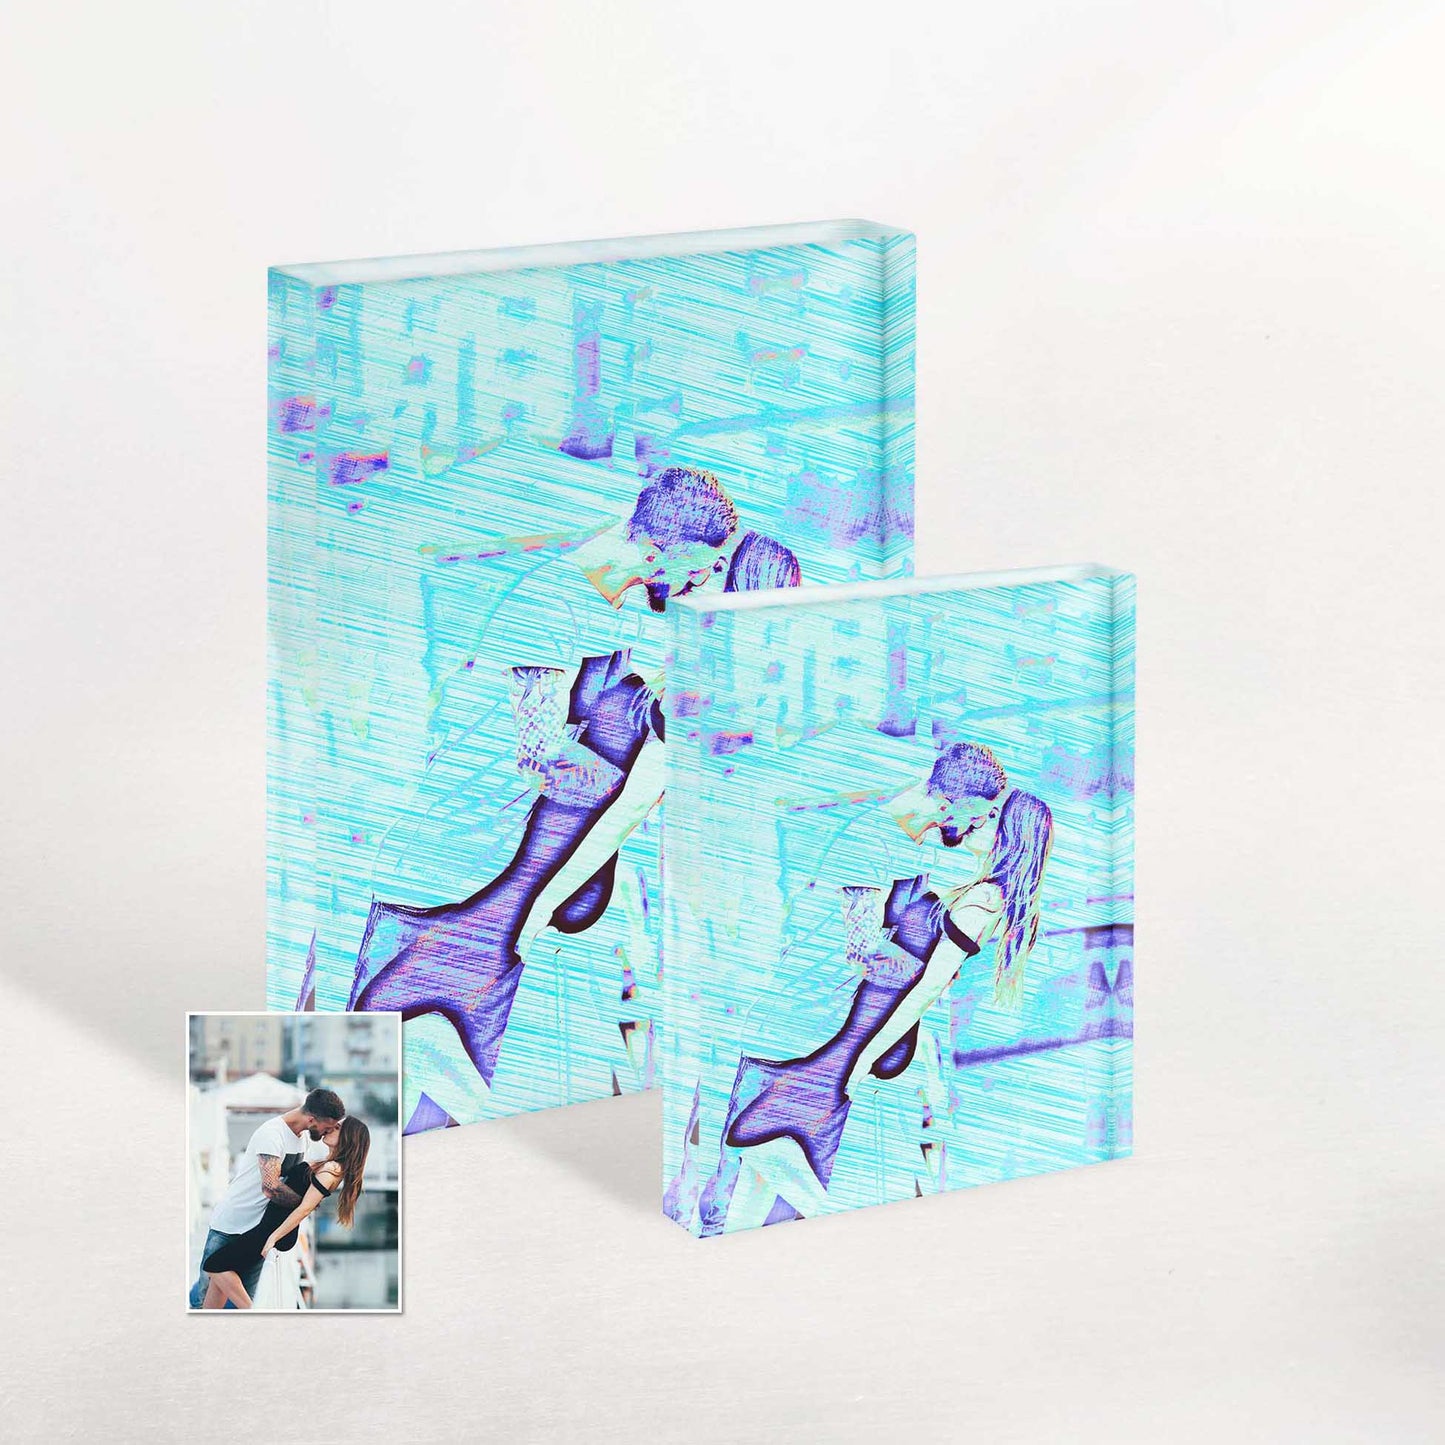 Unleash your creativity with our Personalised Blue Drawing Acrylic Block Photo. This original artwork, made from your photo, is a fresh and cool addition to your decor. Its vibrant and vivid colors bring a fun 